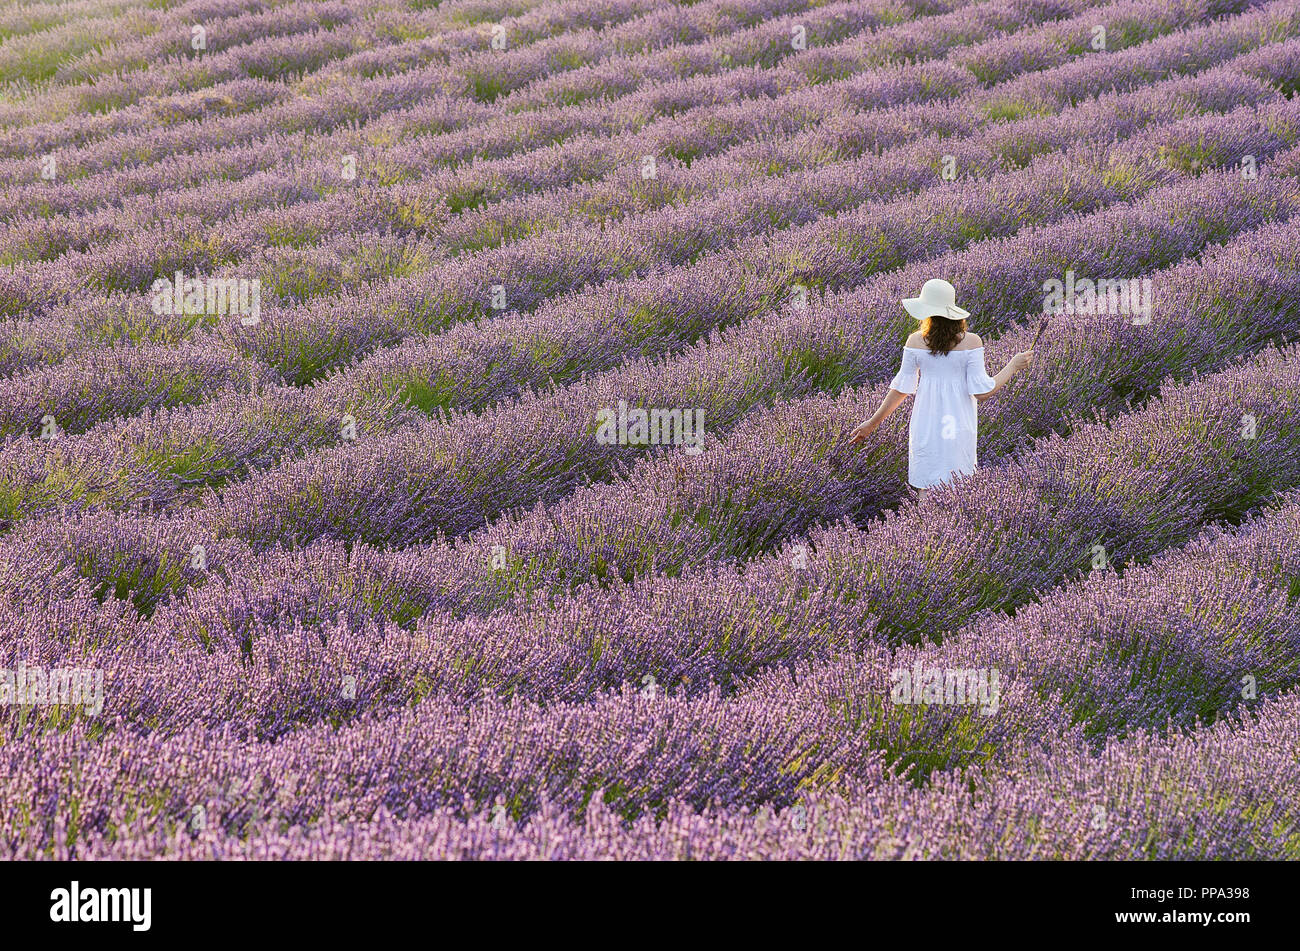 Woman in a white dress seen on her back walking between the lavender fields in France Stock Photo